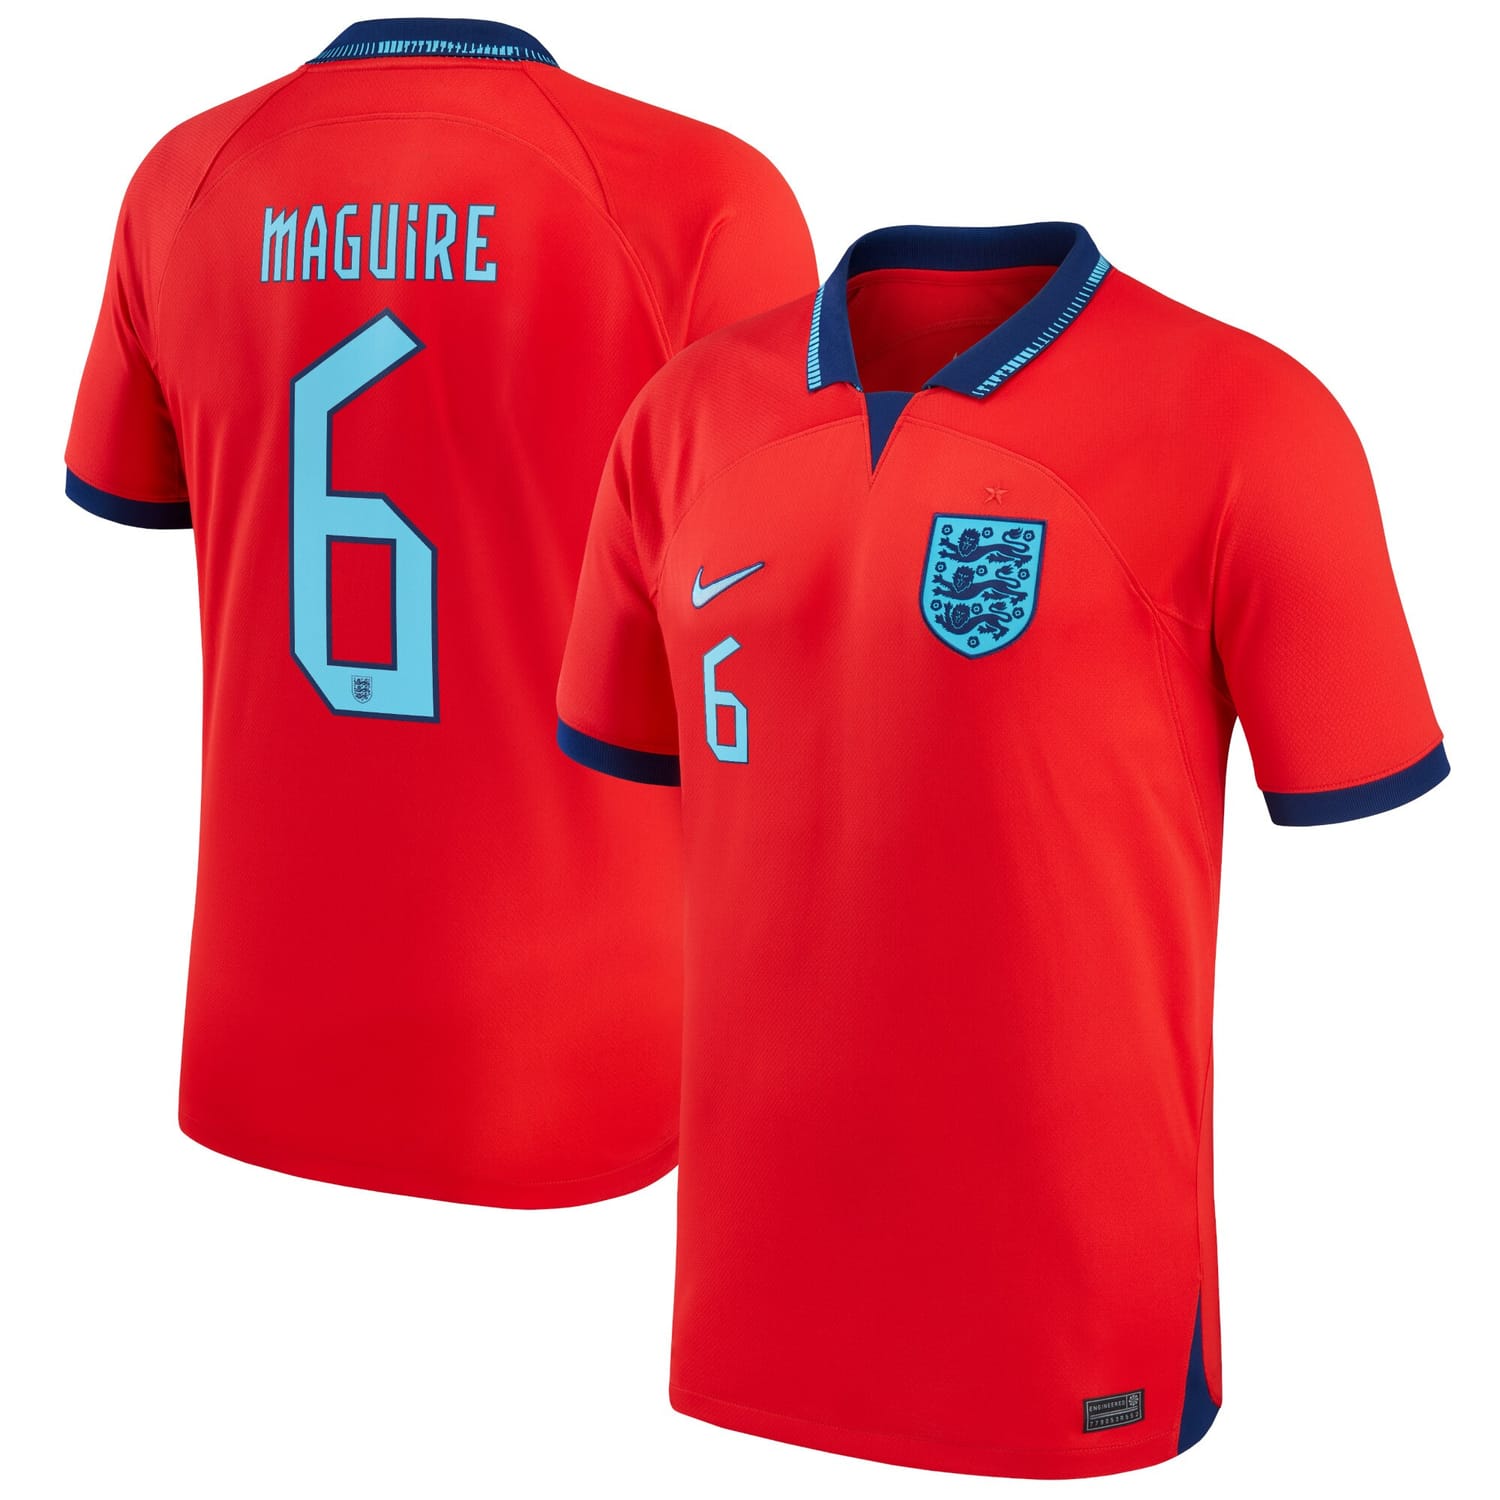 England National Team Away Jersey Shirt 2022 player Harry Maguire 6 printing for Men